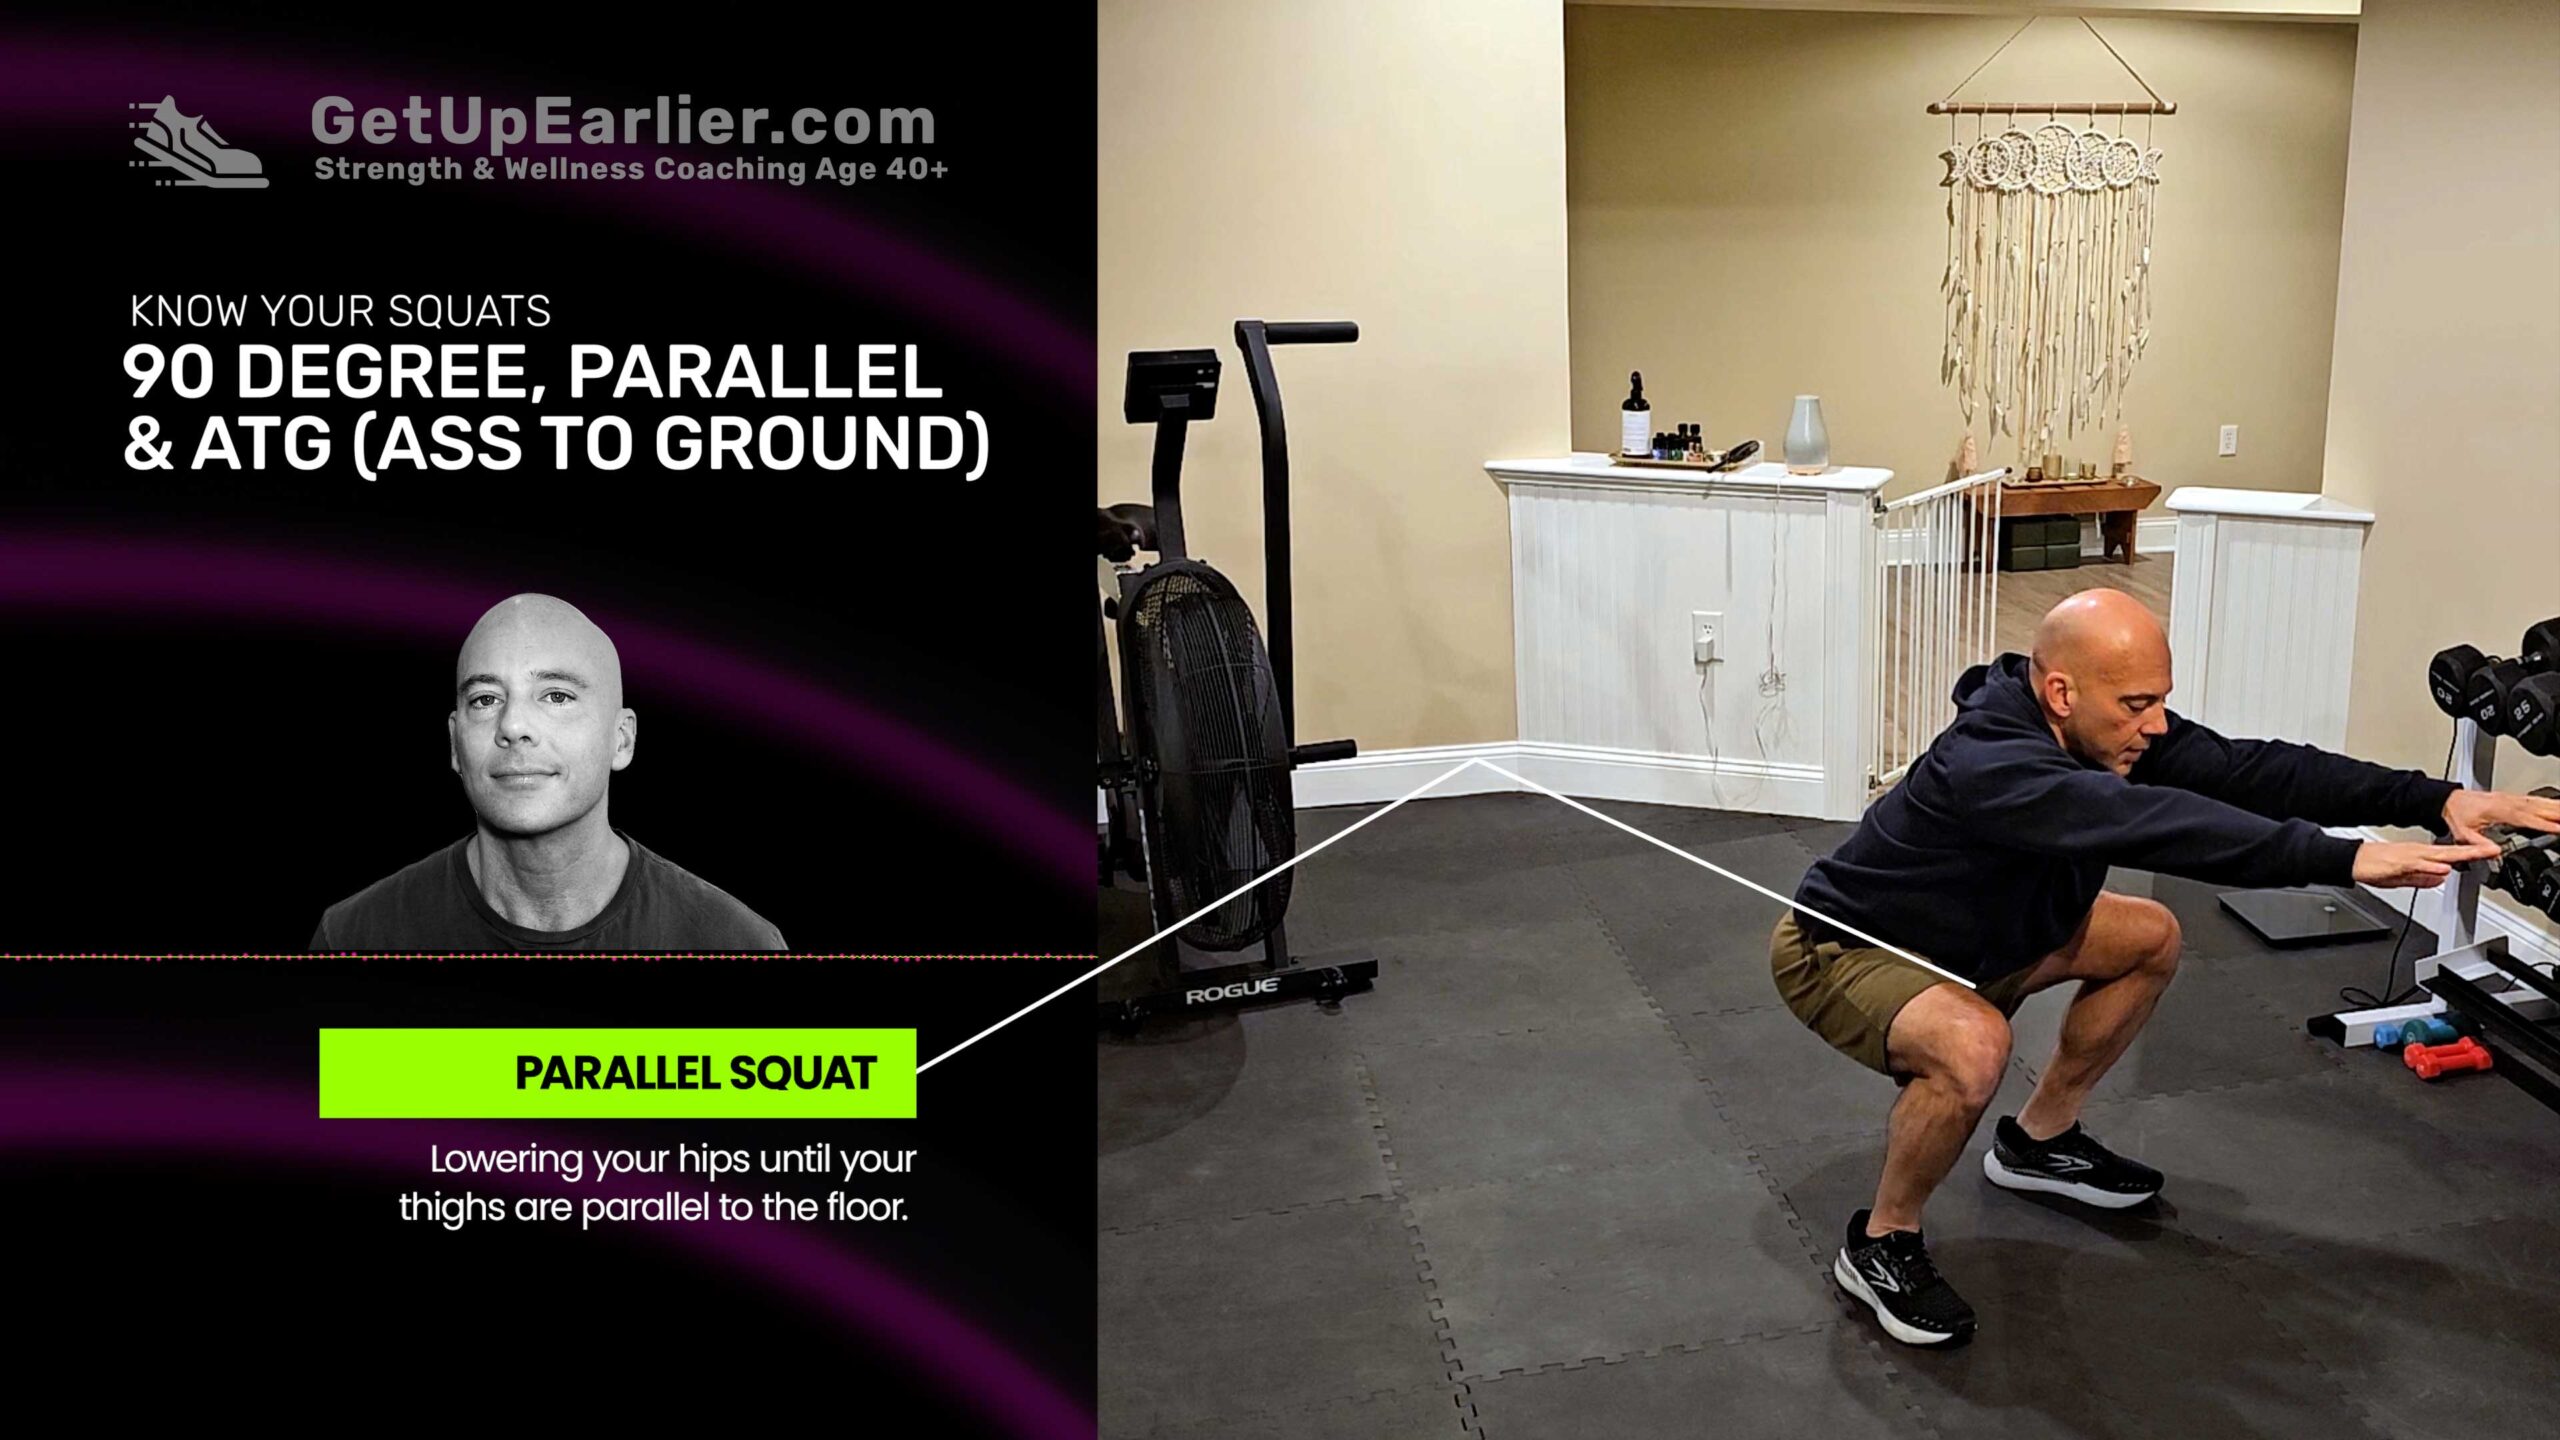 Featured image for “Know your squats: 90 degree, parallel & ATG (ass to ground) #FormPolice #squat”